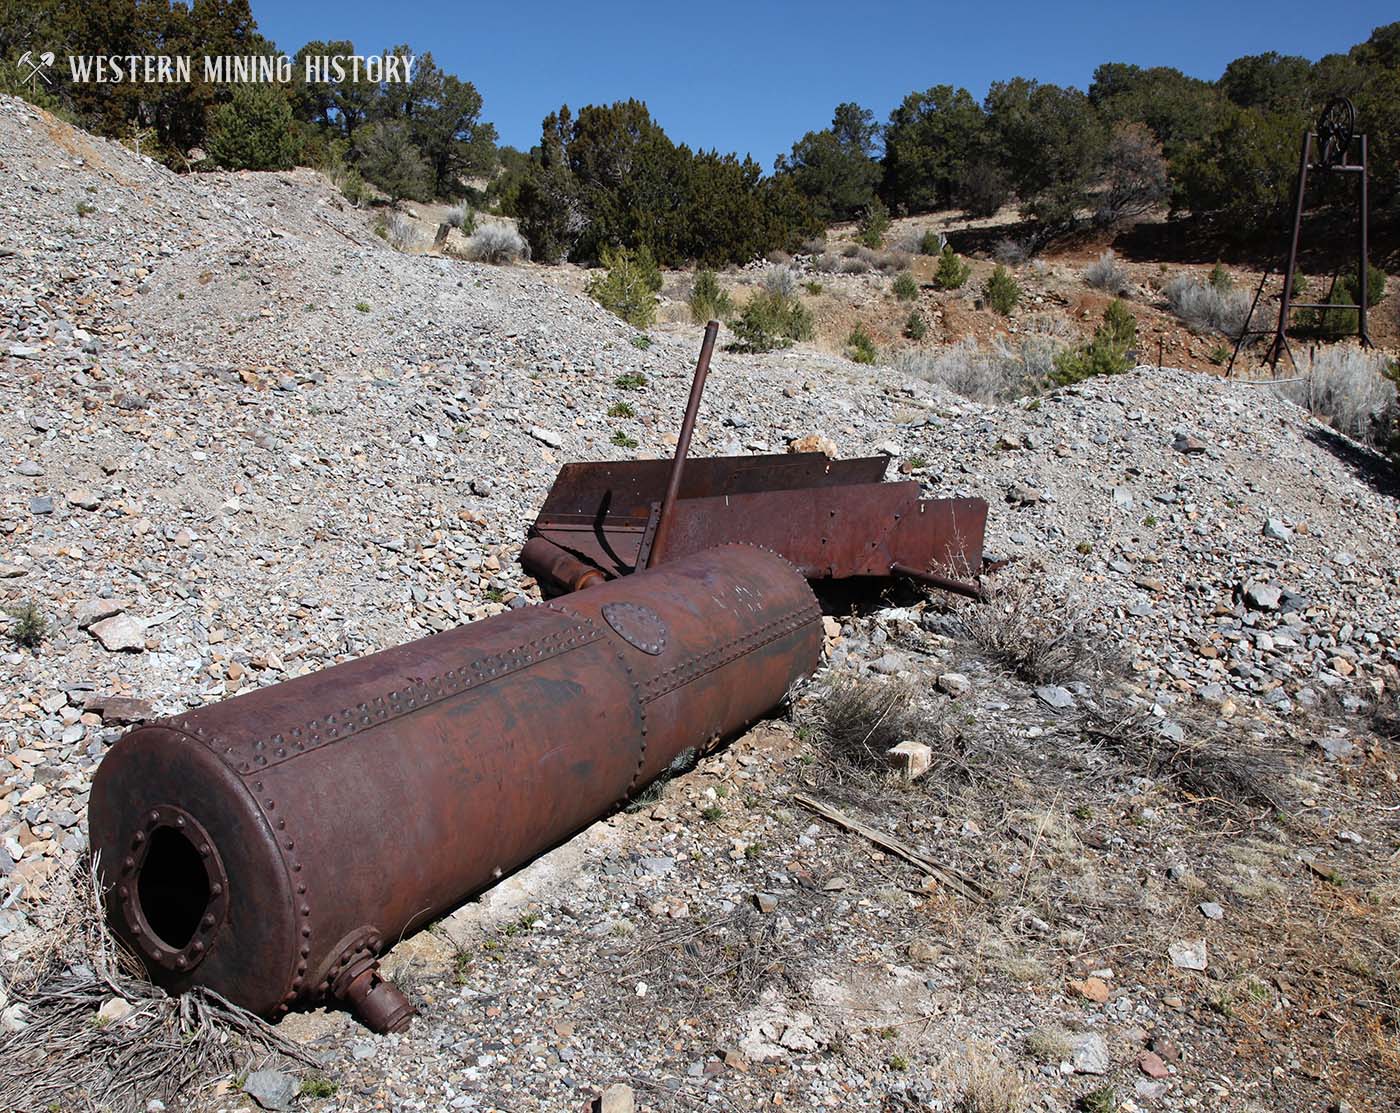 Old mining equipment at the Kelly Mine